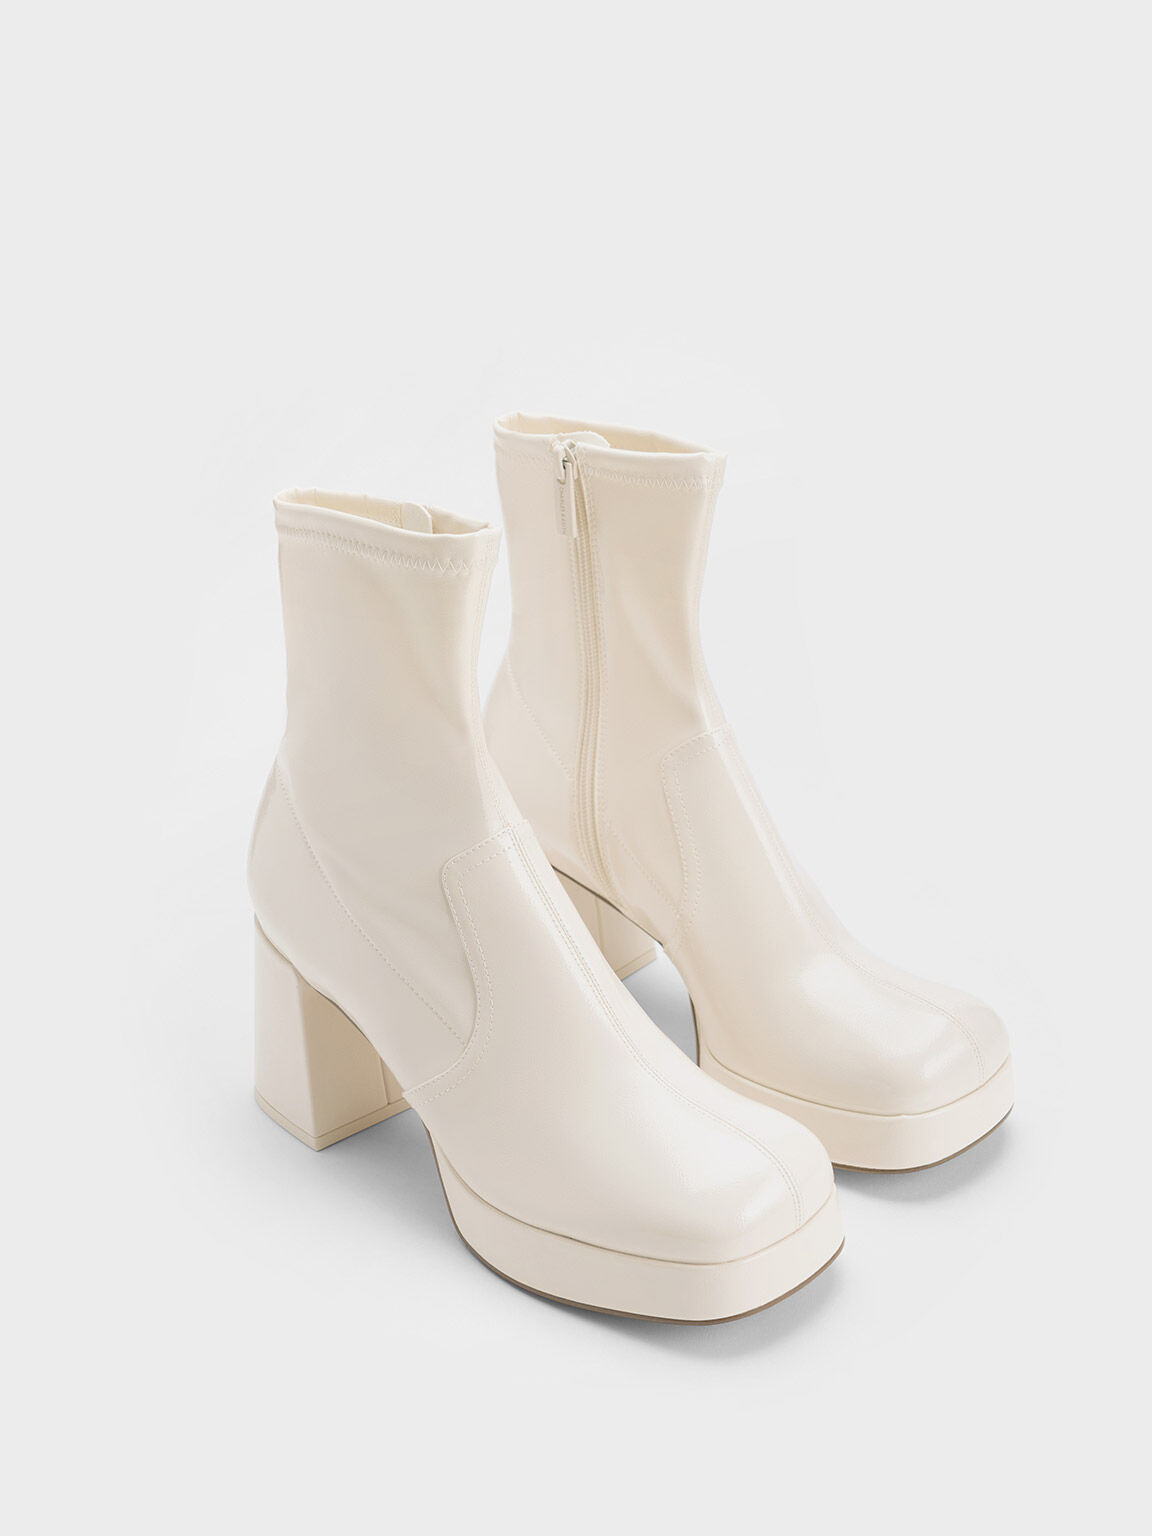 Buy Delize Womens offwhite Chelsea Ankle Boots 57010-6 at Amazon.in